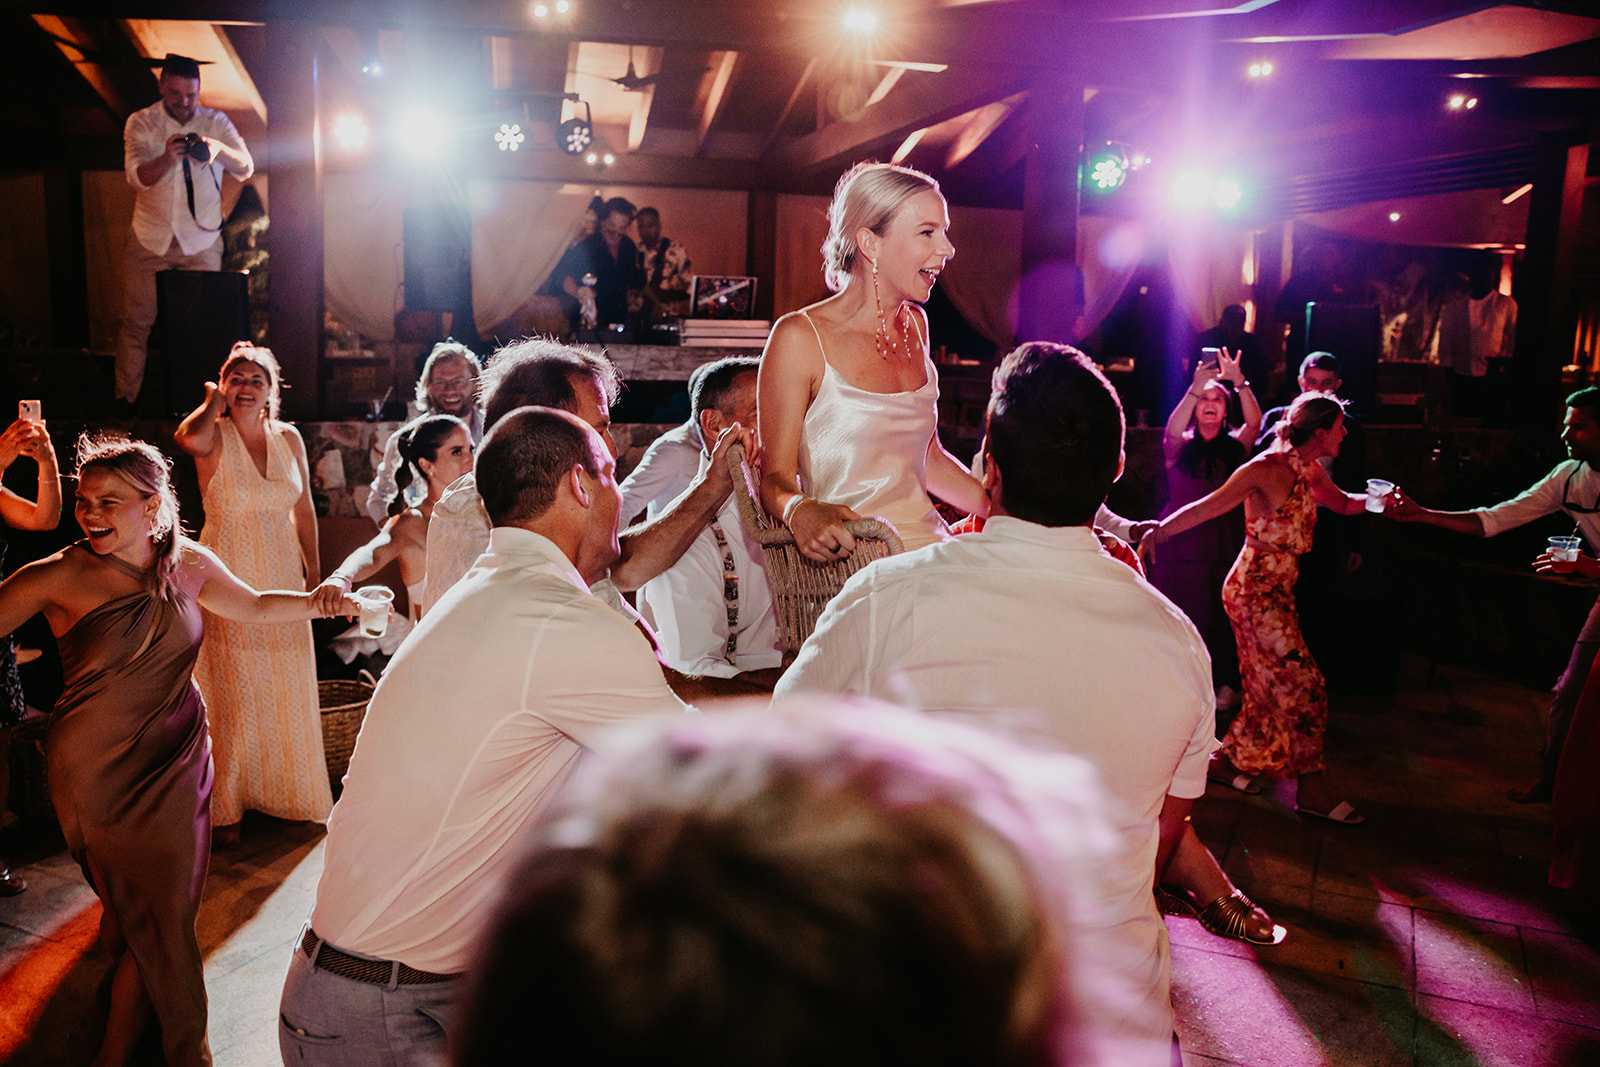 Lively wedding celebration with guests dancing and enjoying the tropical vibes in the British Virgin Islands.